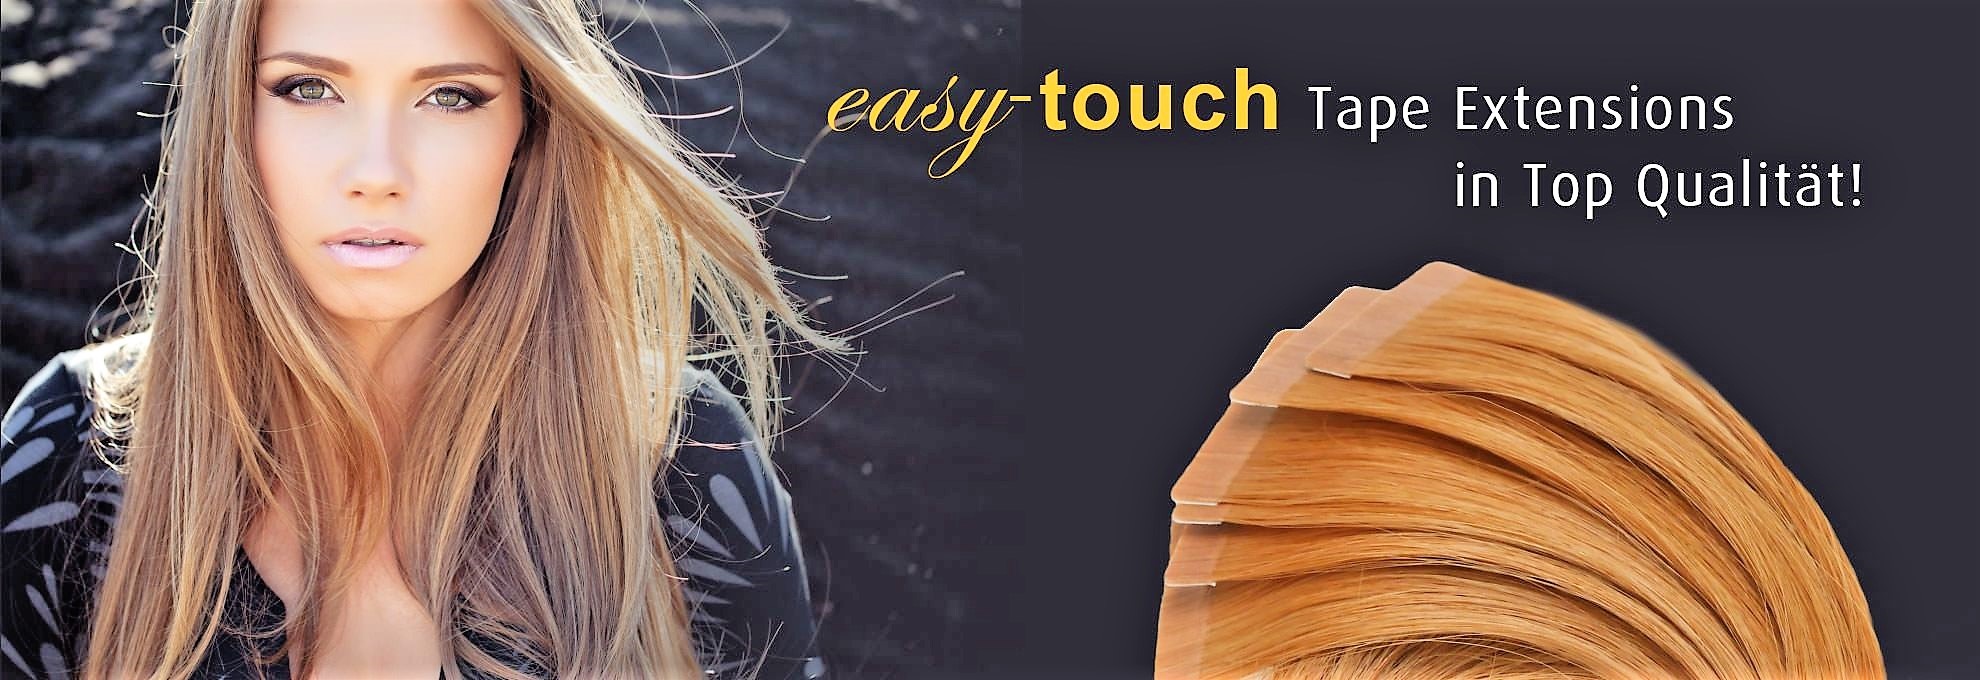 Intouch Tape Extensions Easy Touch Tape Extensions